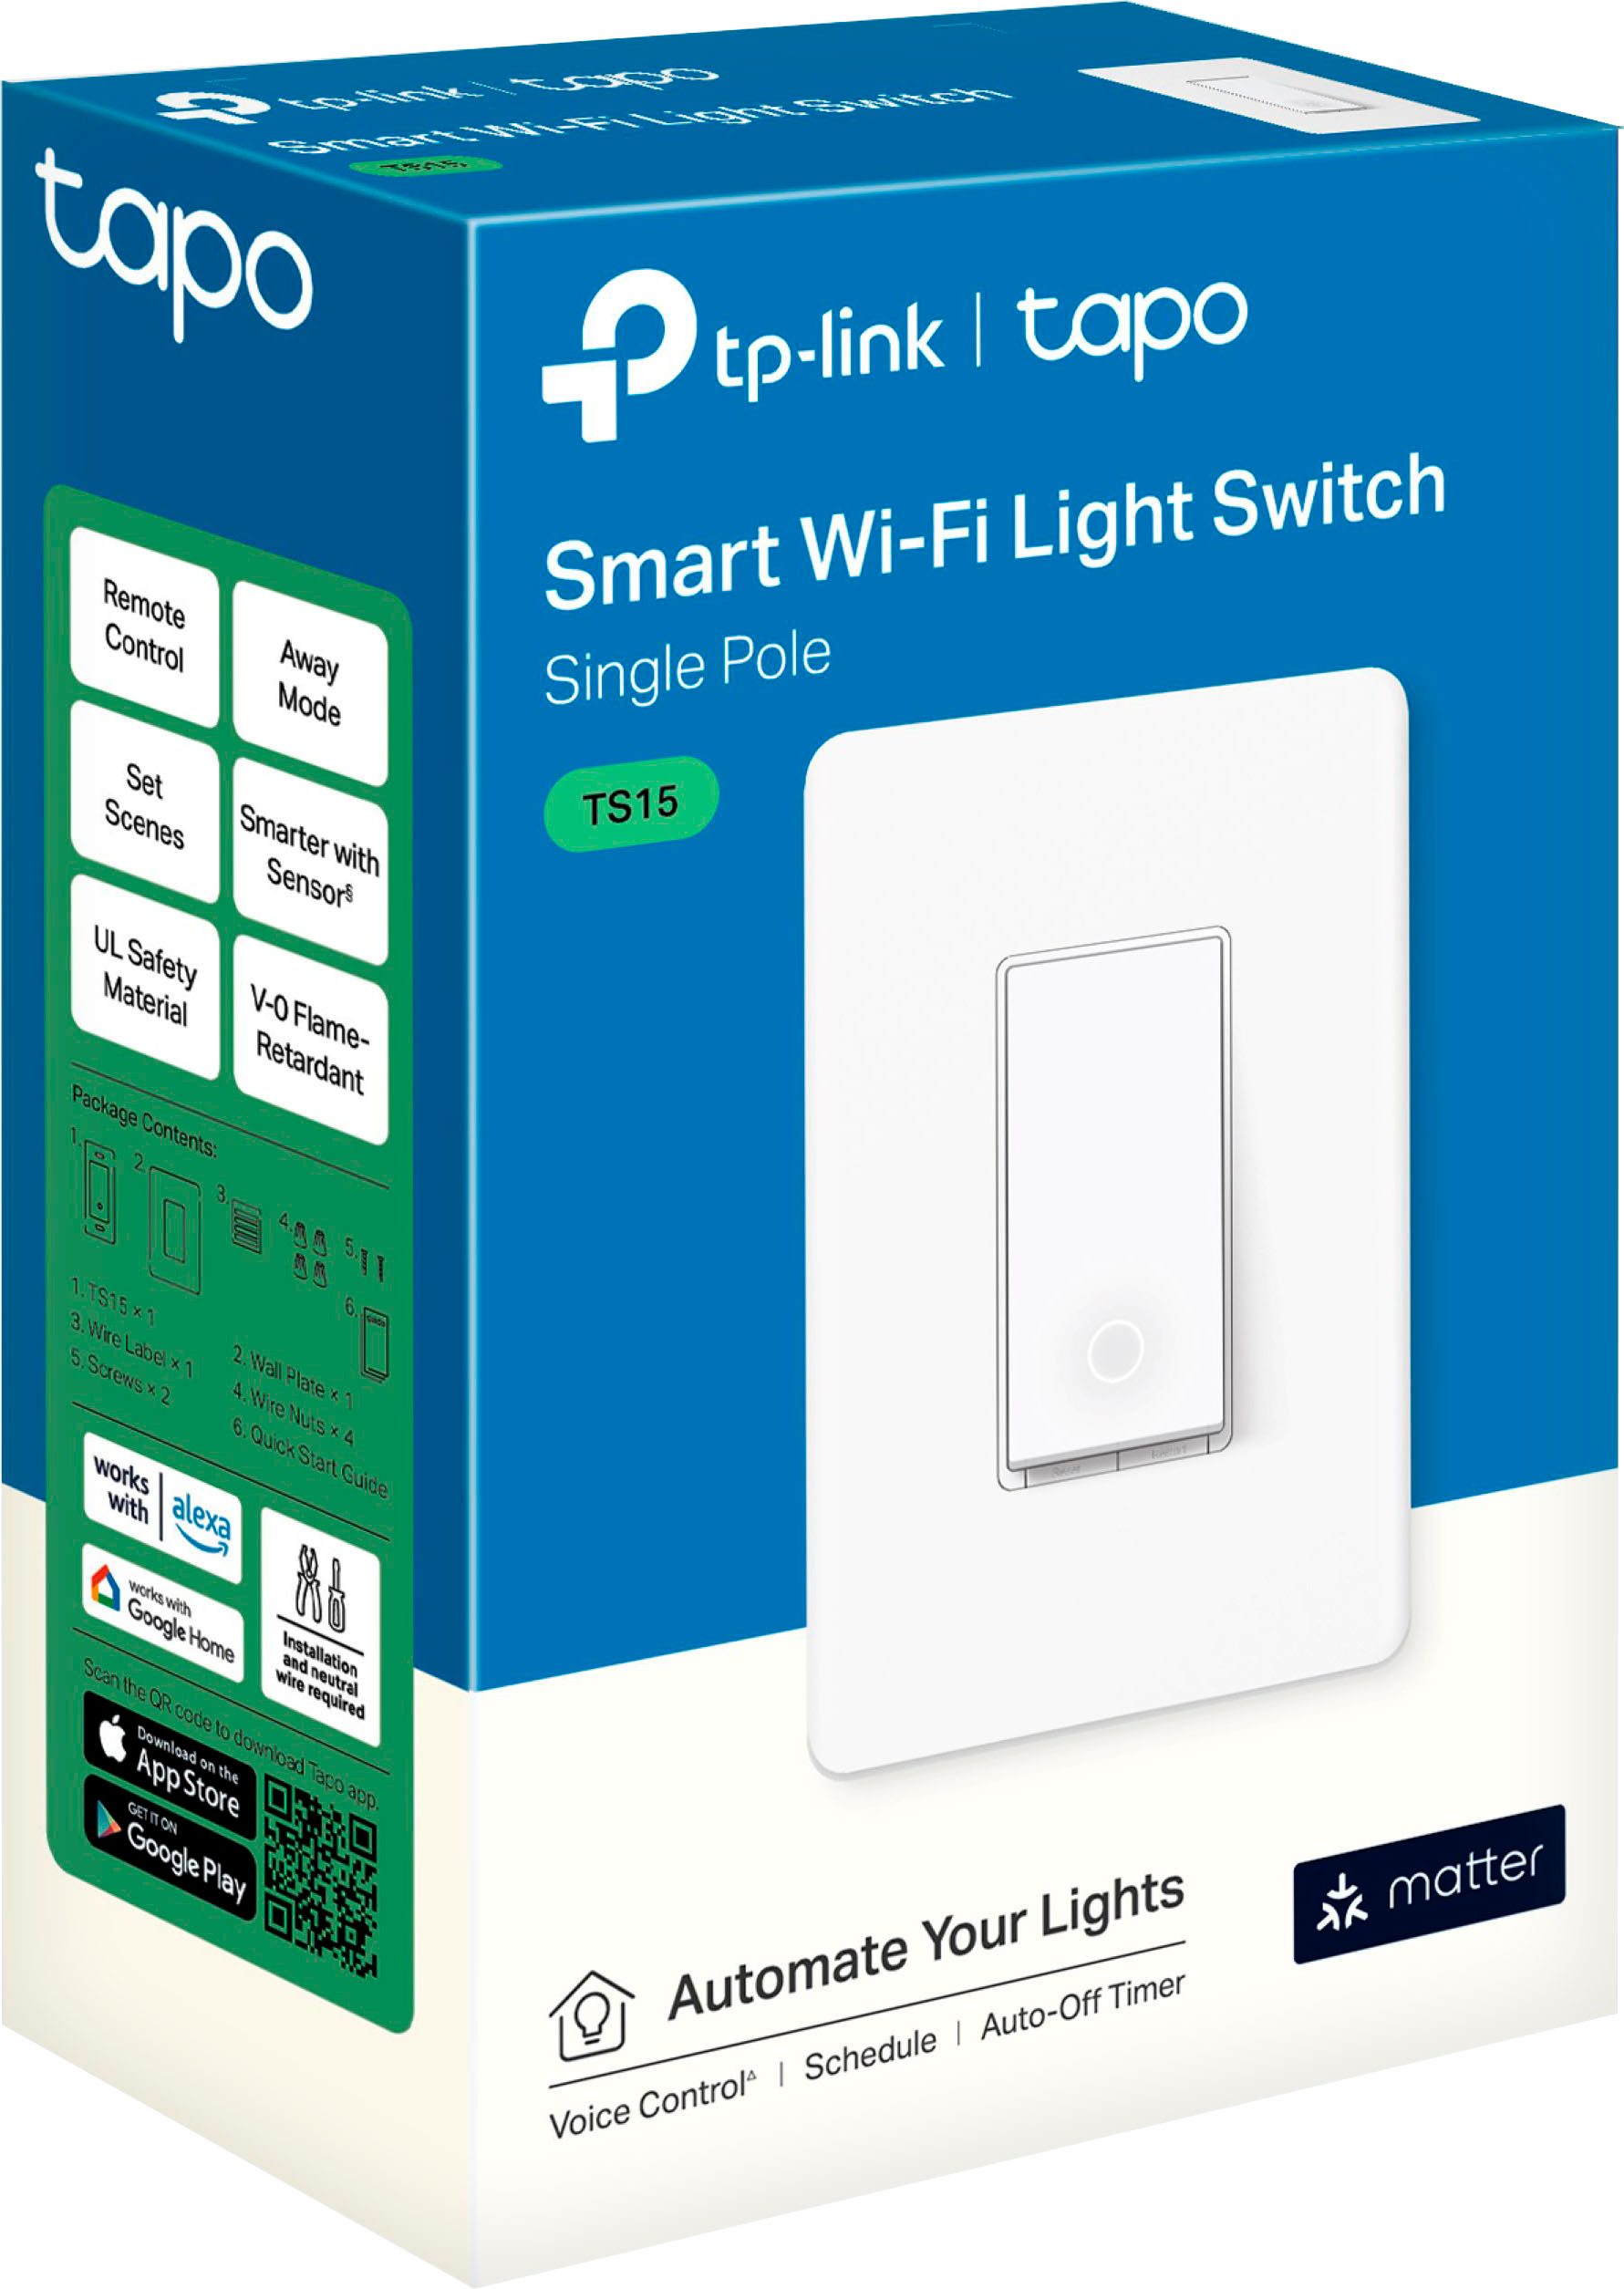 How I can gain control of your TP-LINK home switch